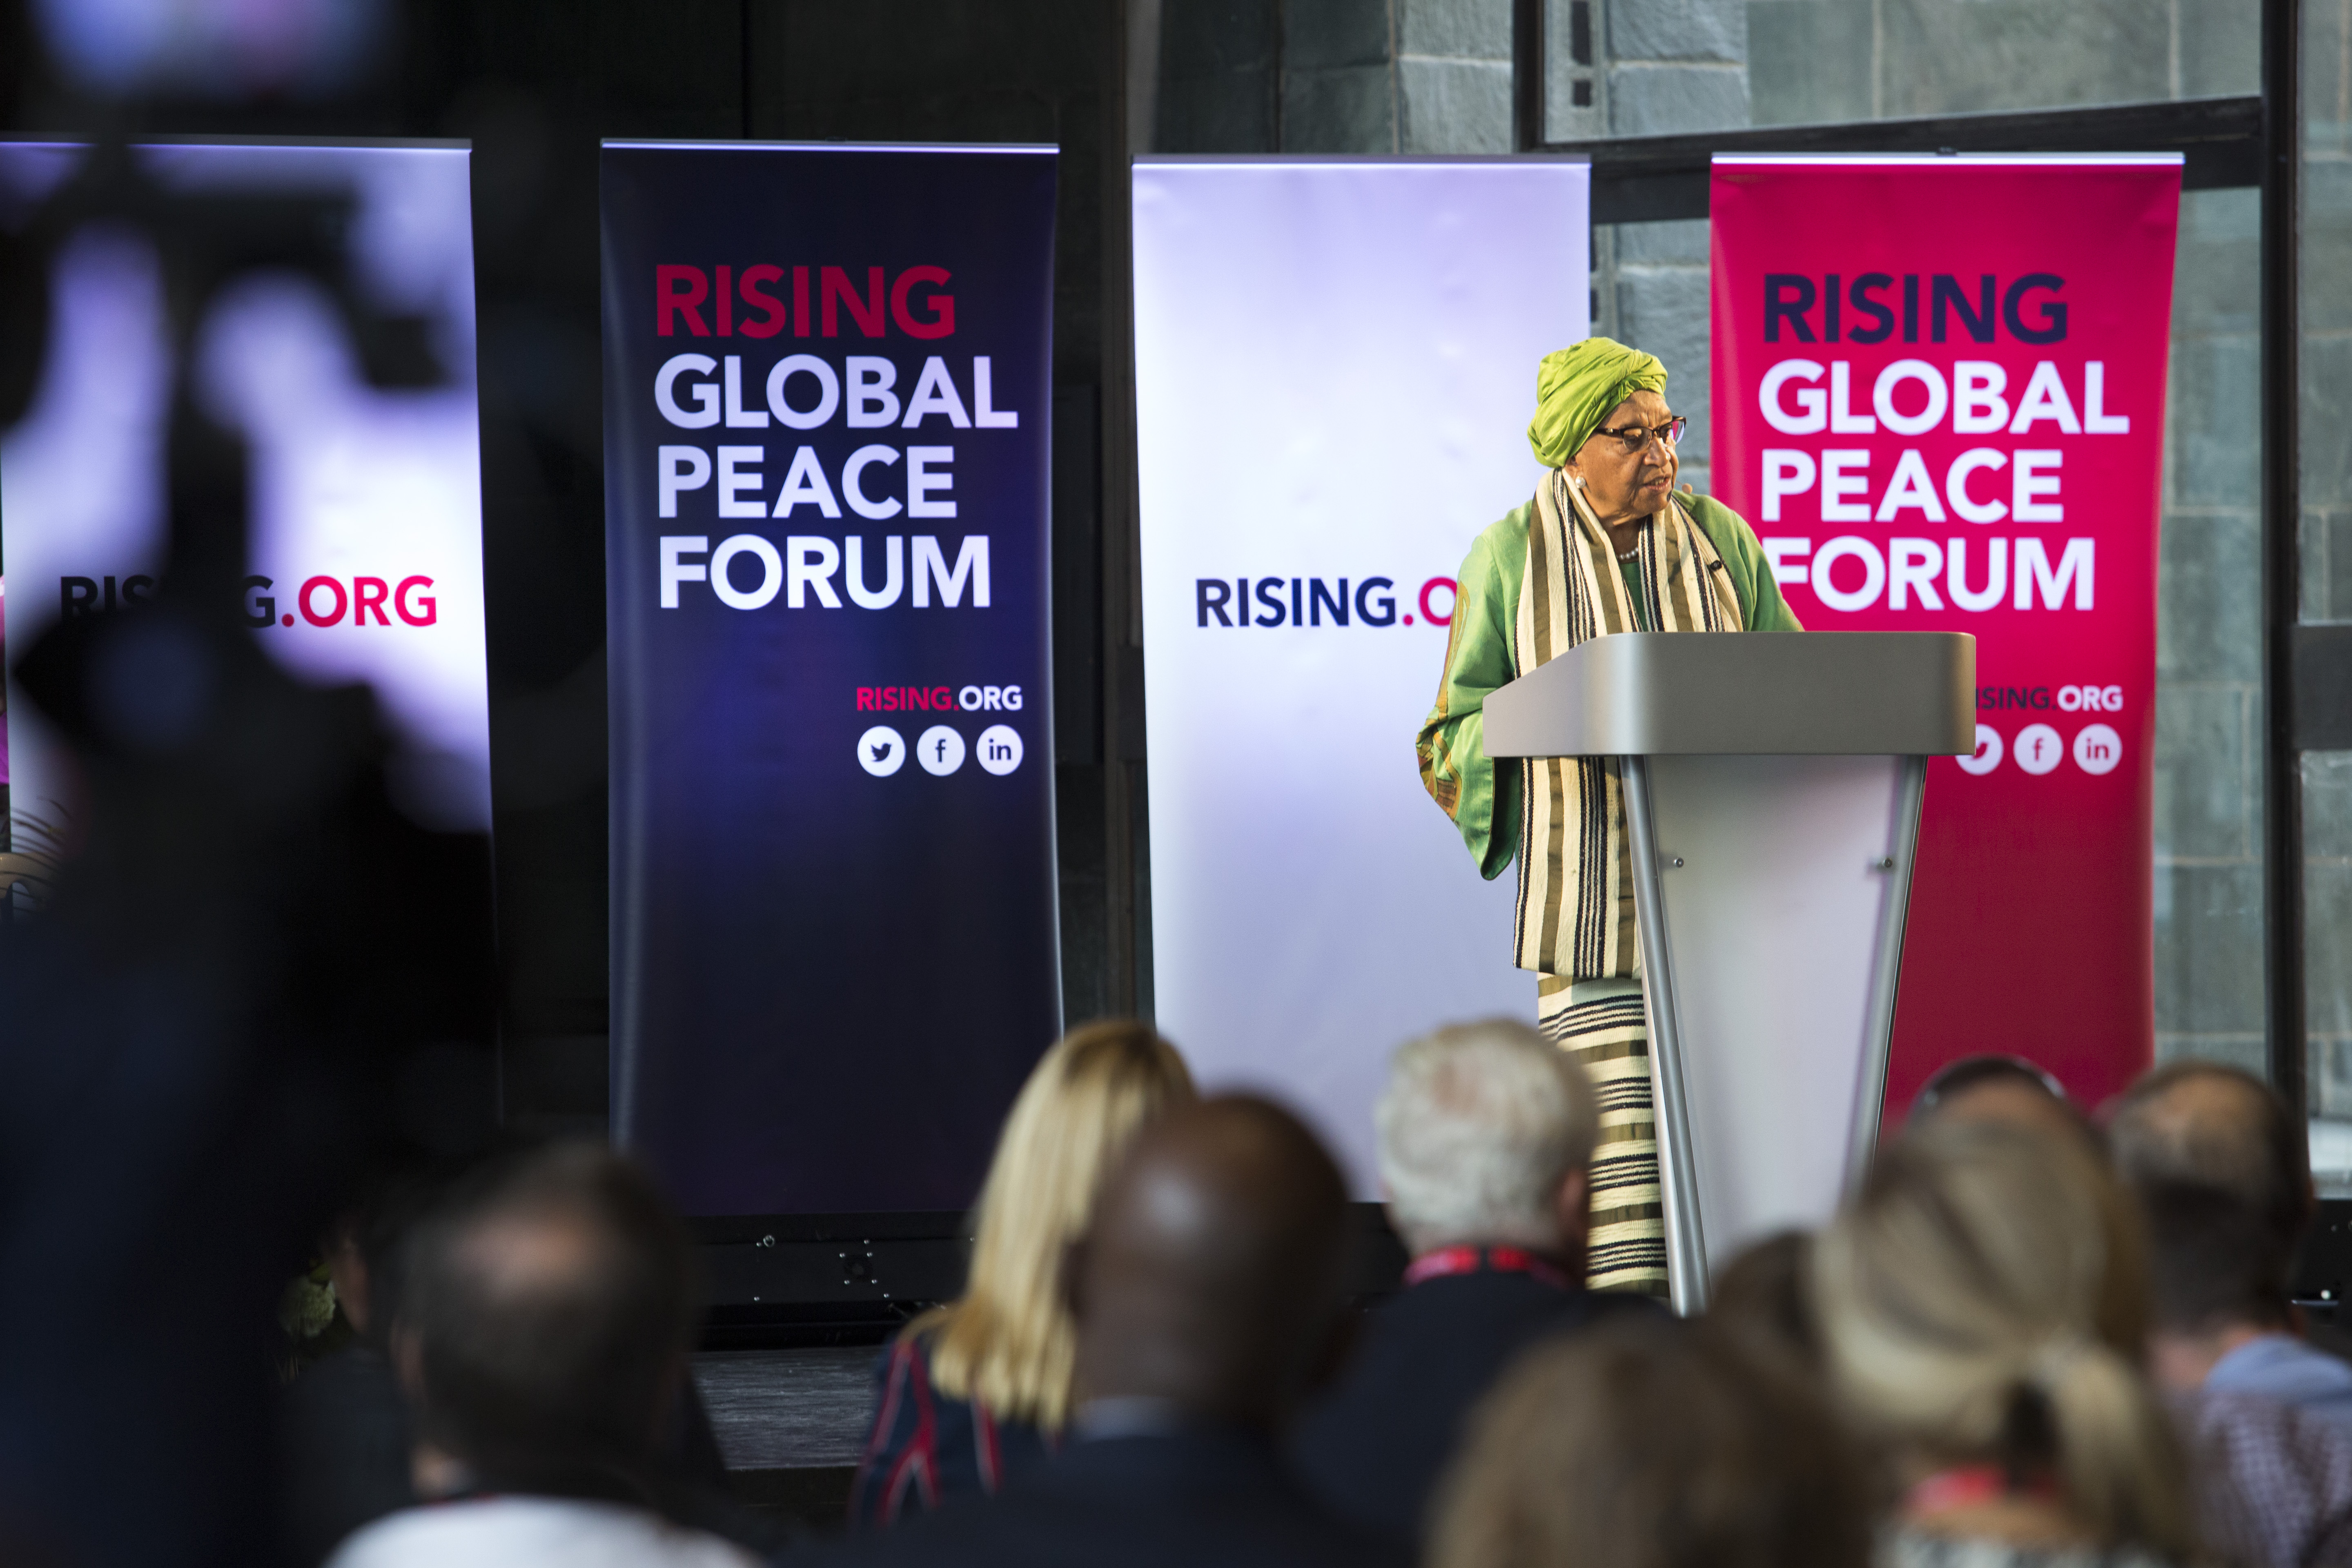 RISING Global Peace Forum now in it's fourth year